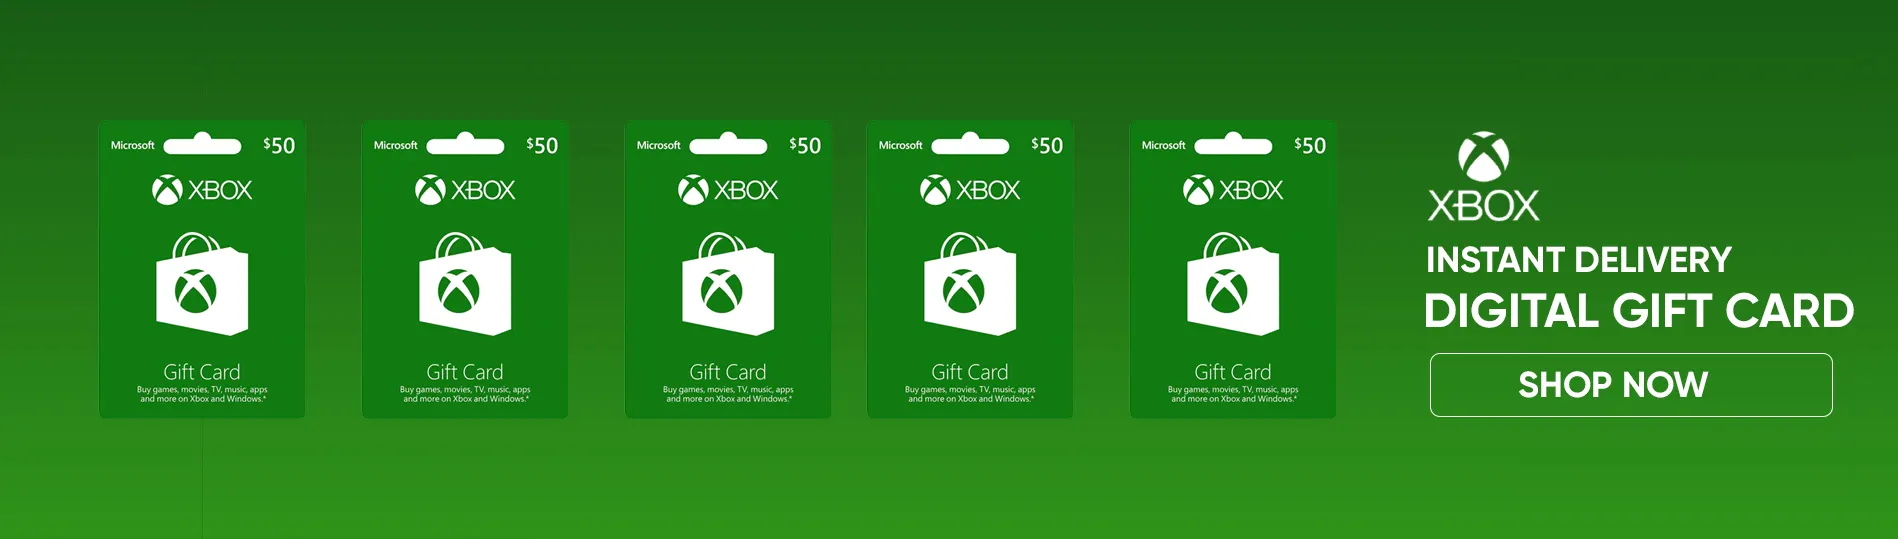 BANNER_XBOX_DIGTIAL_CARDS